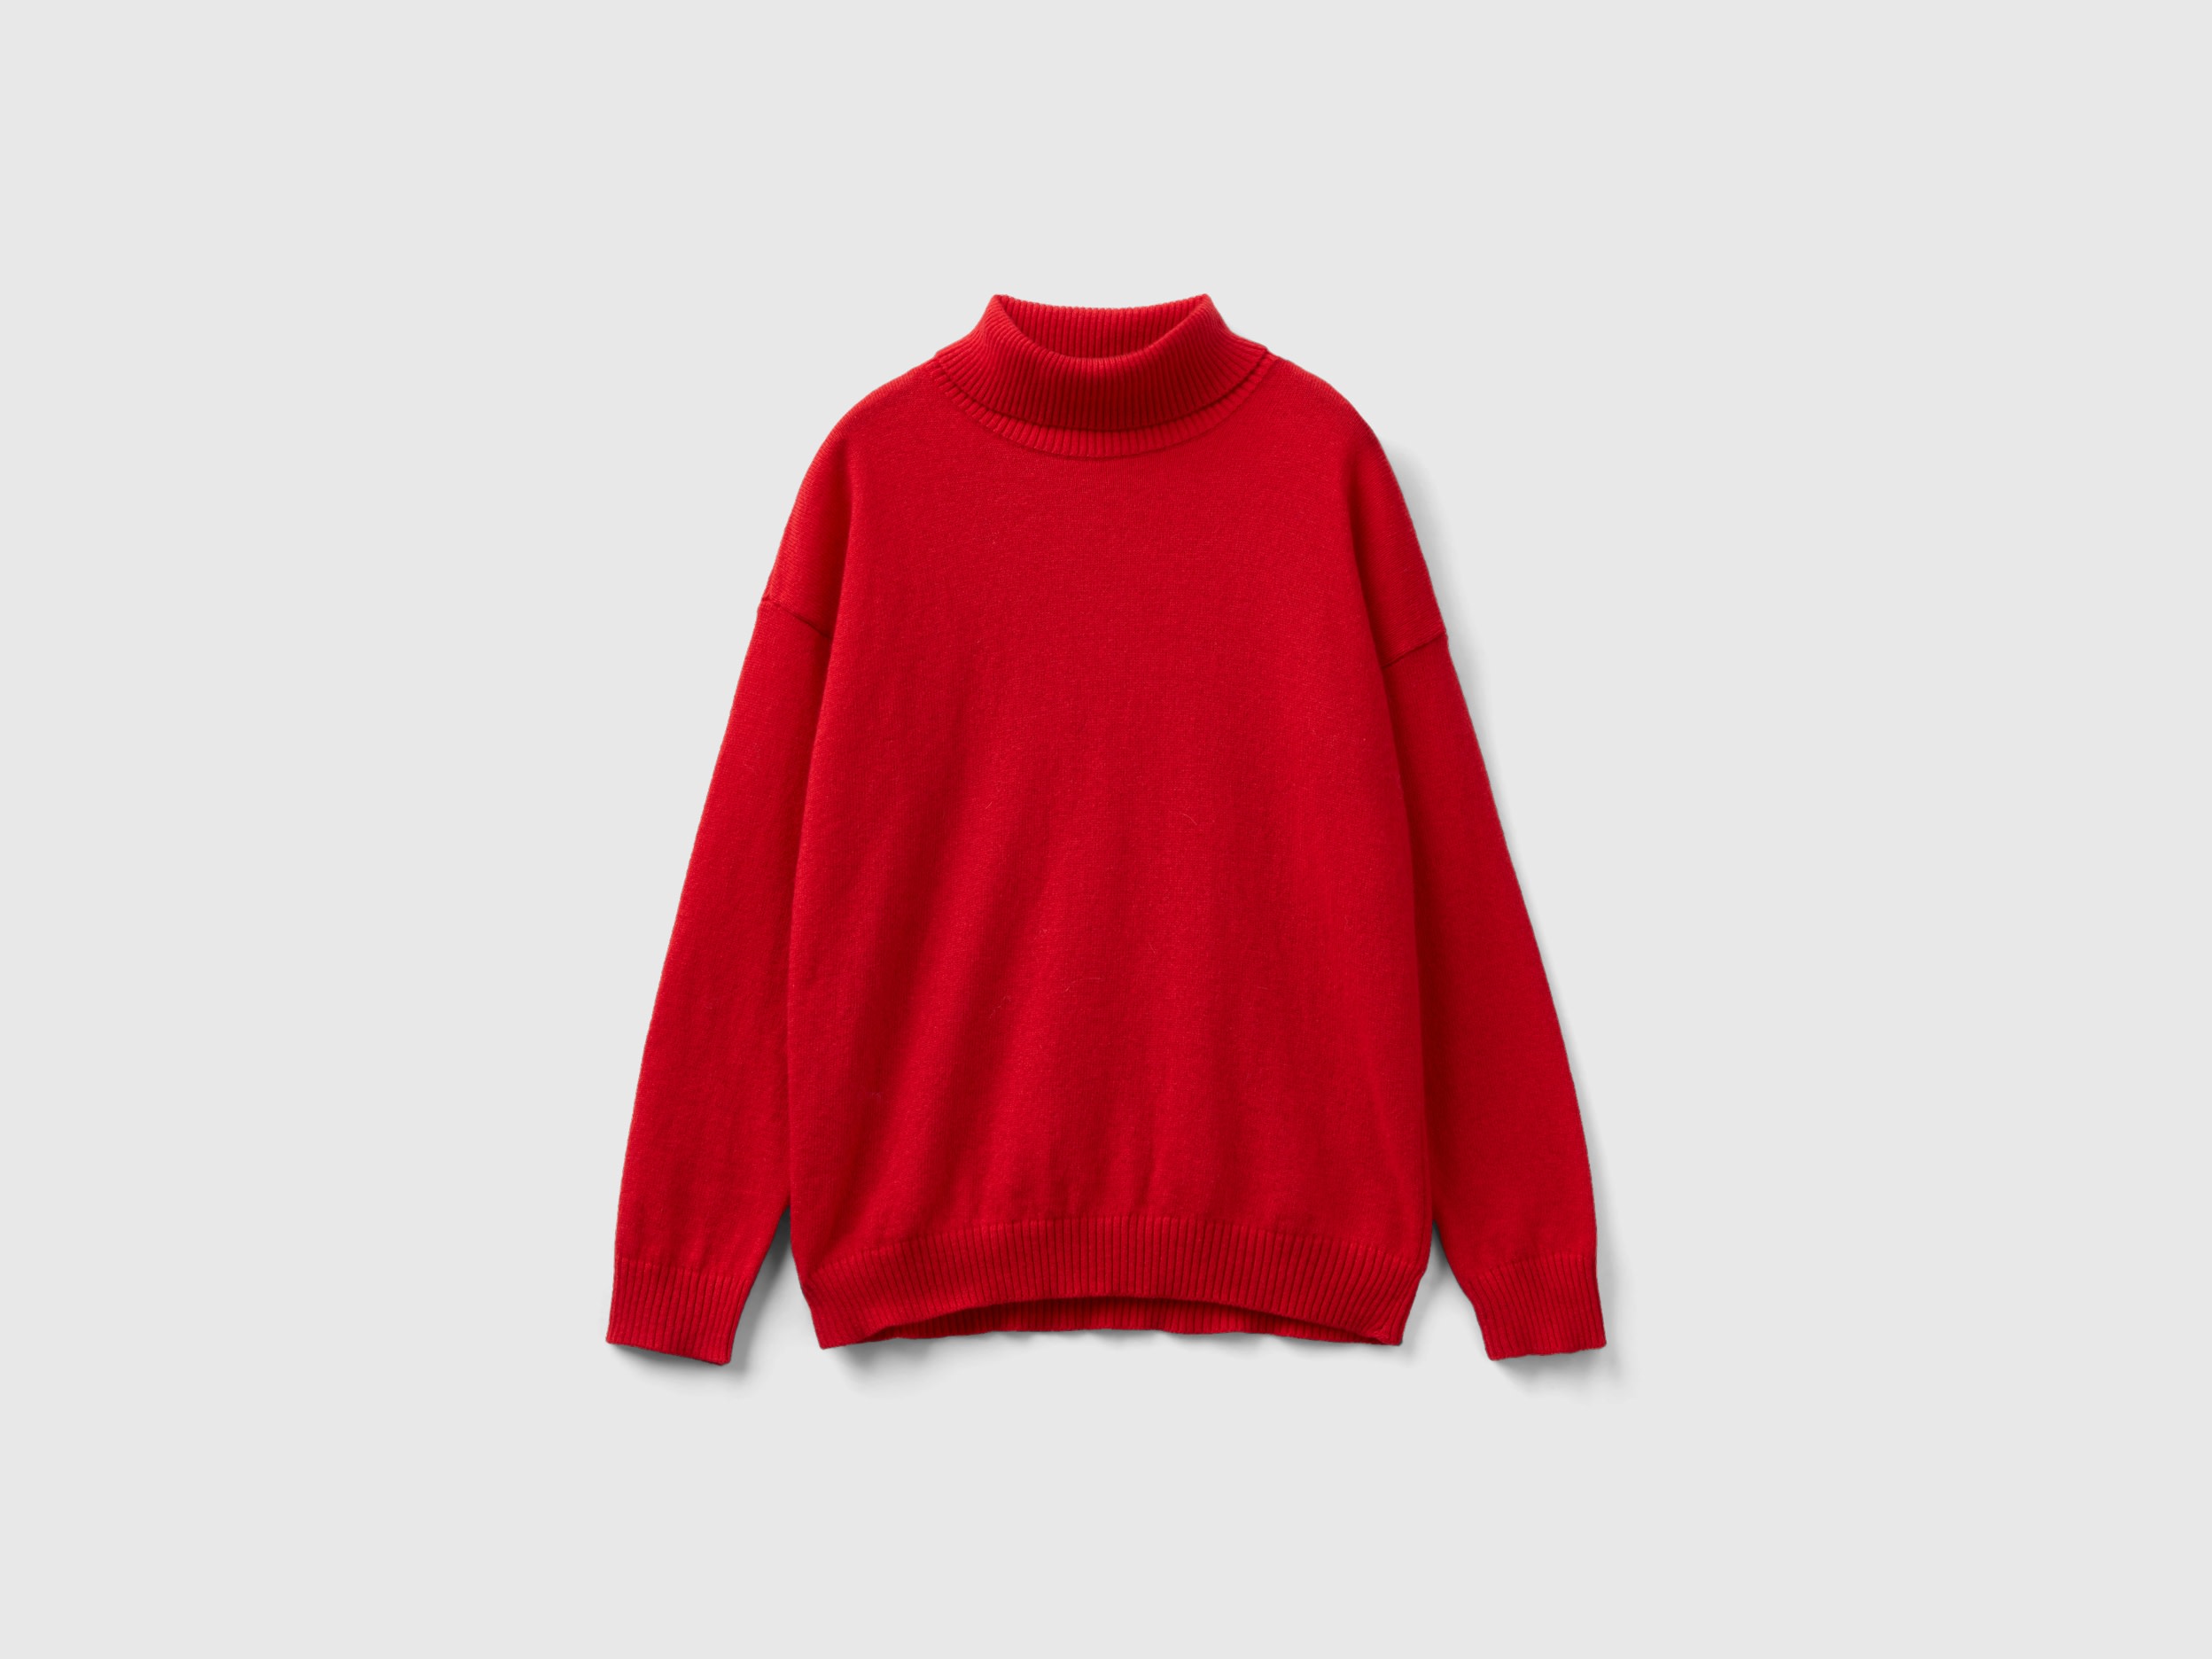 Benetton, Turtleneck Sweater In Cashmere And Wool Blend, size XL, Red, Kids